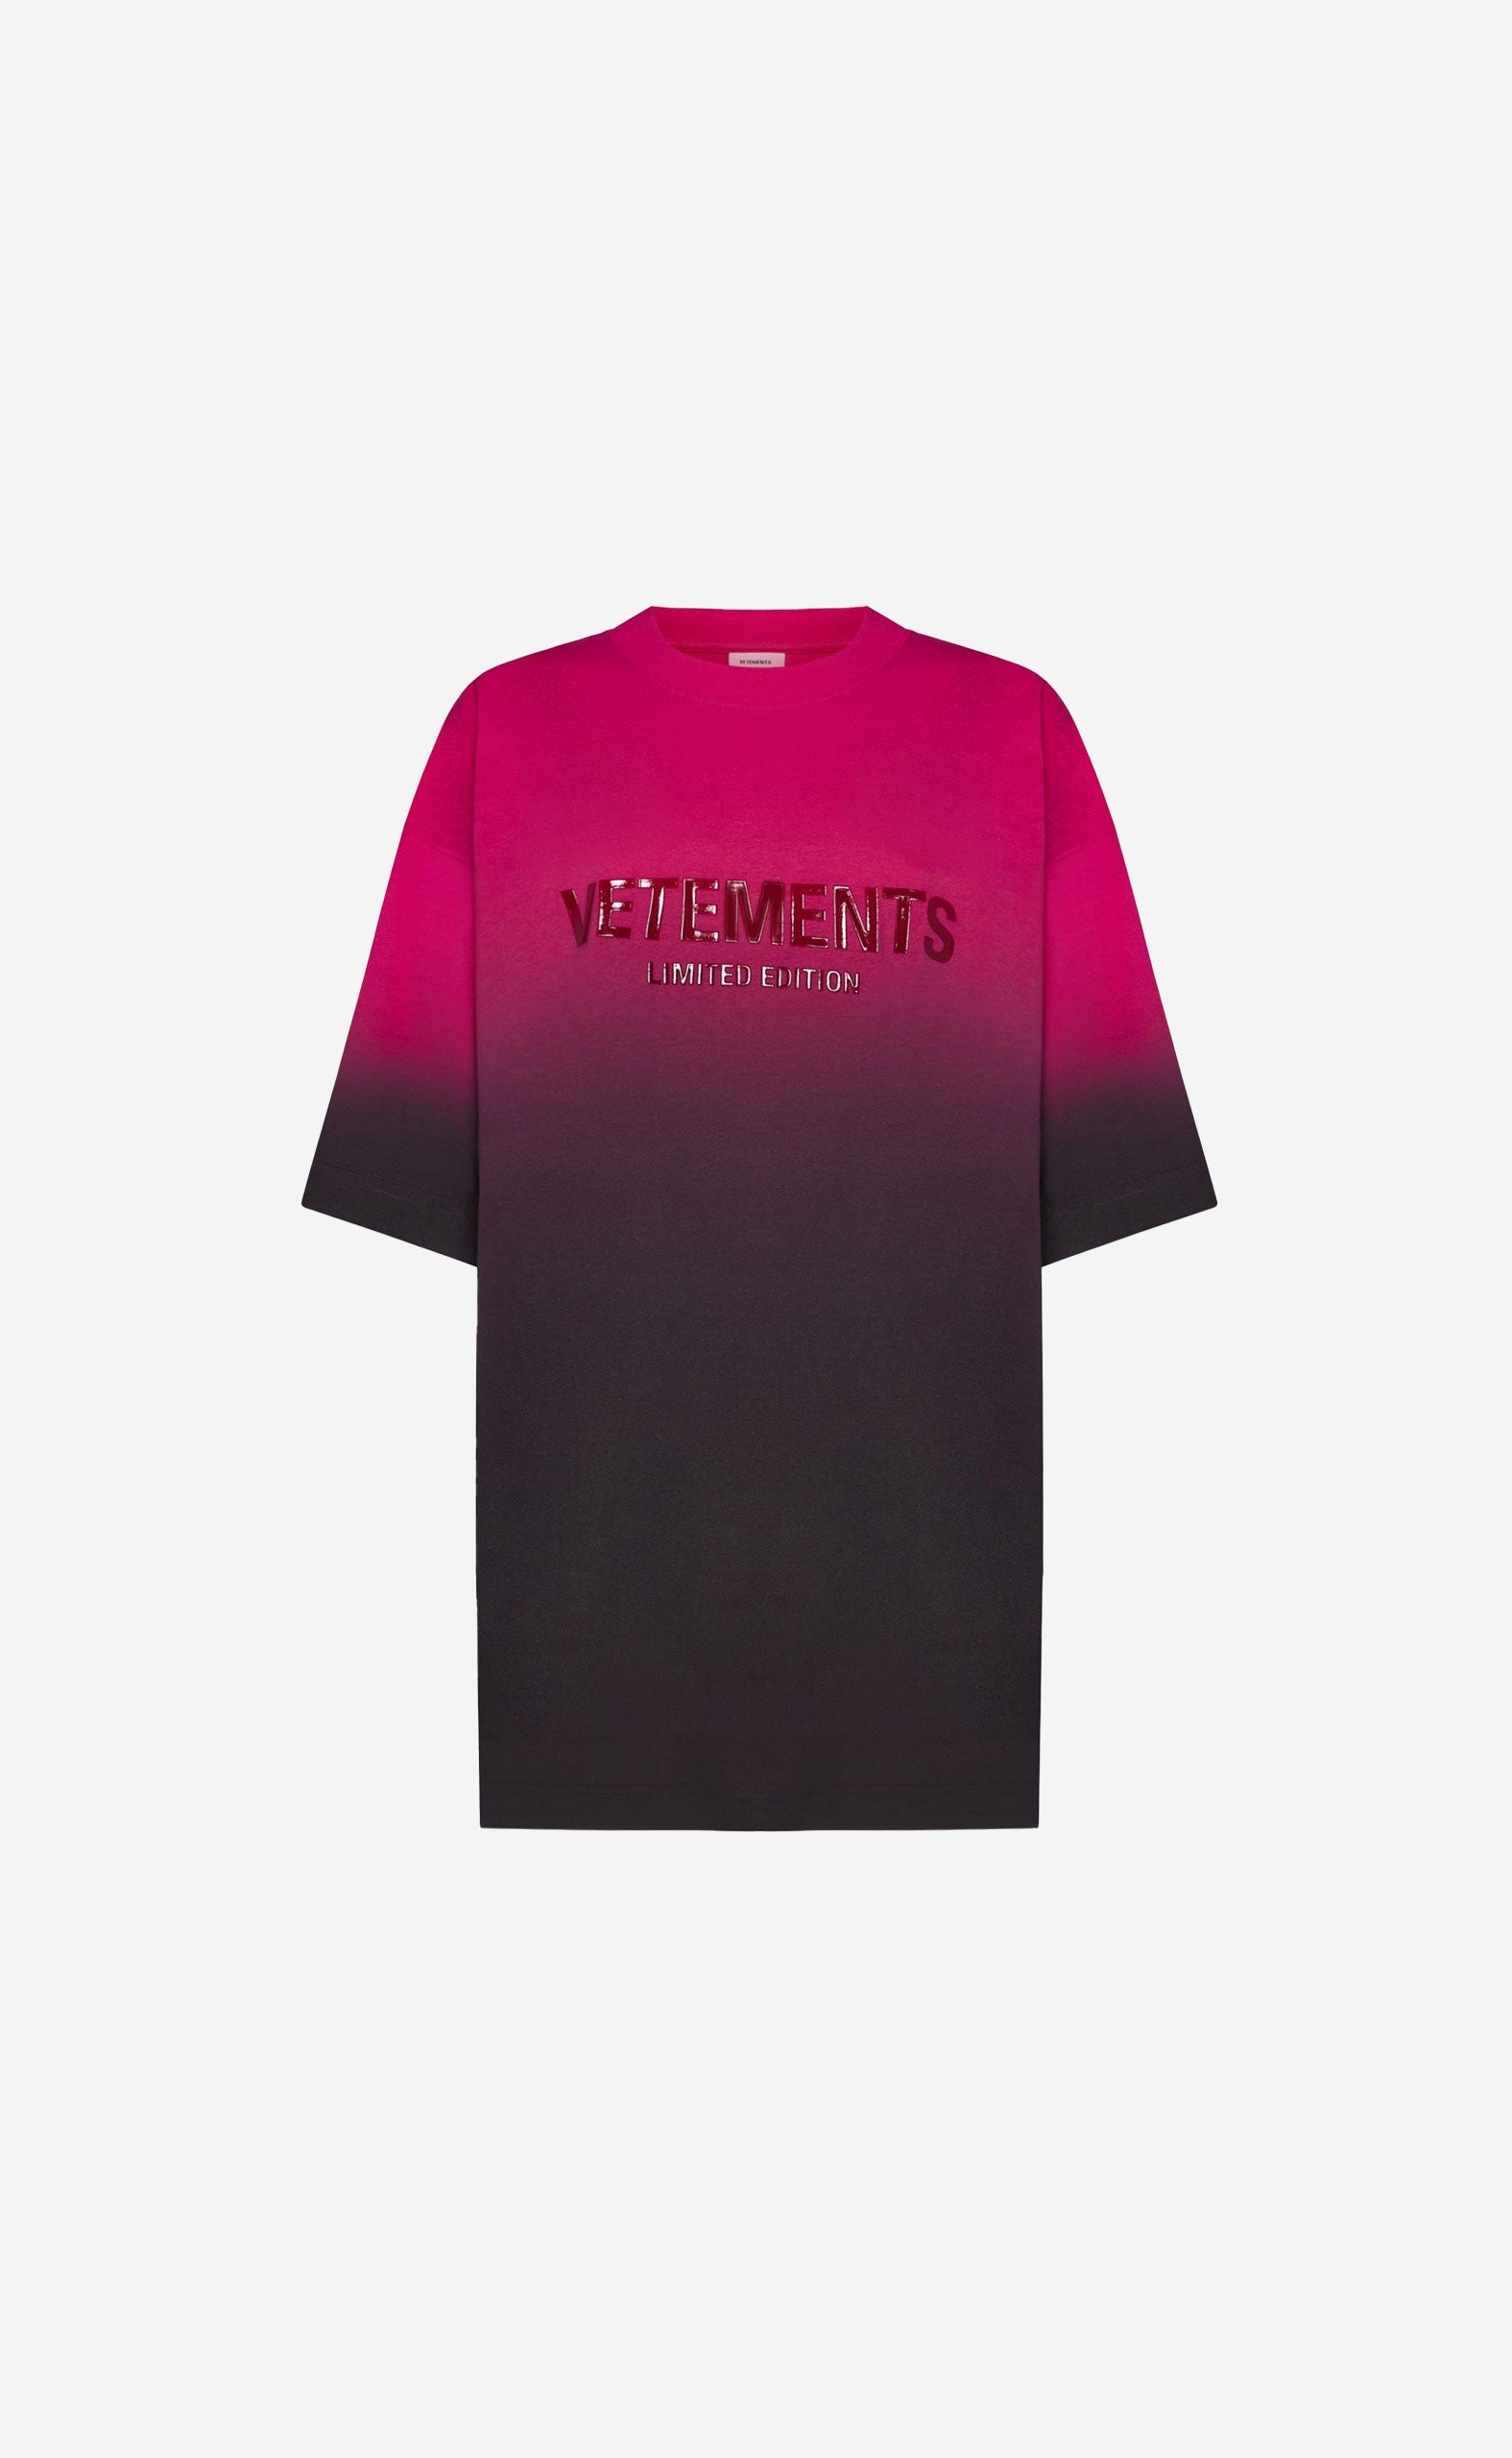 HOT PINK GRADIENT LOGO LIMITED EDITION T-SHIRT